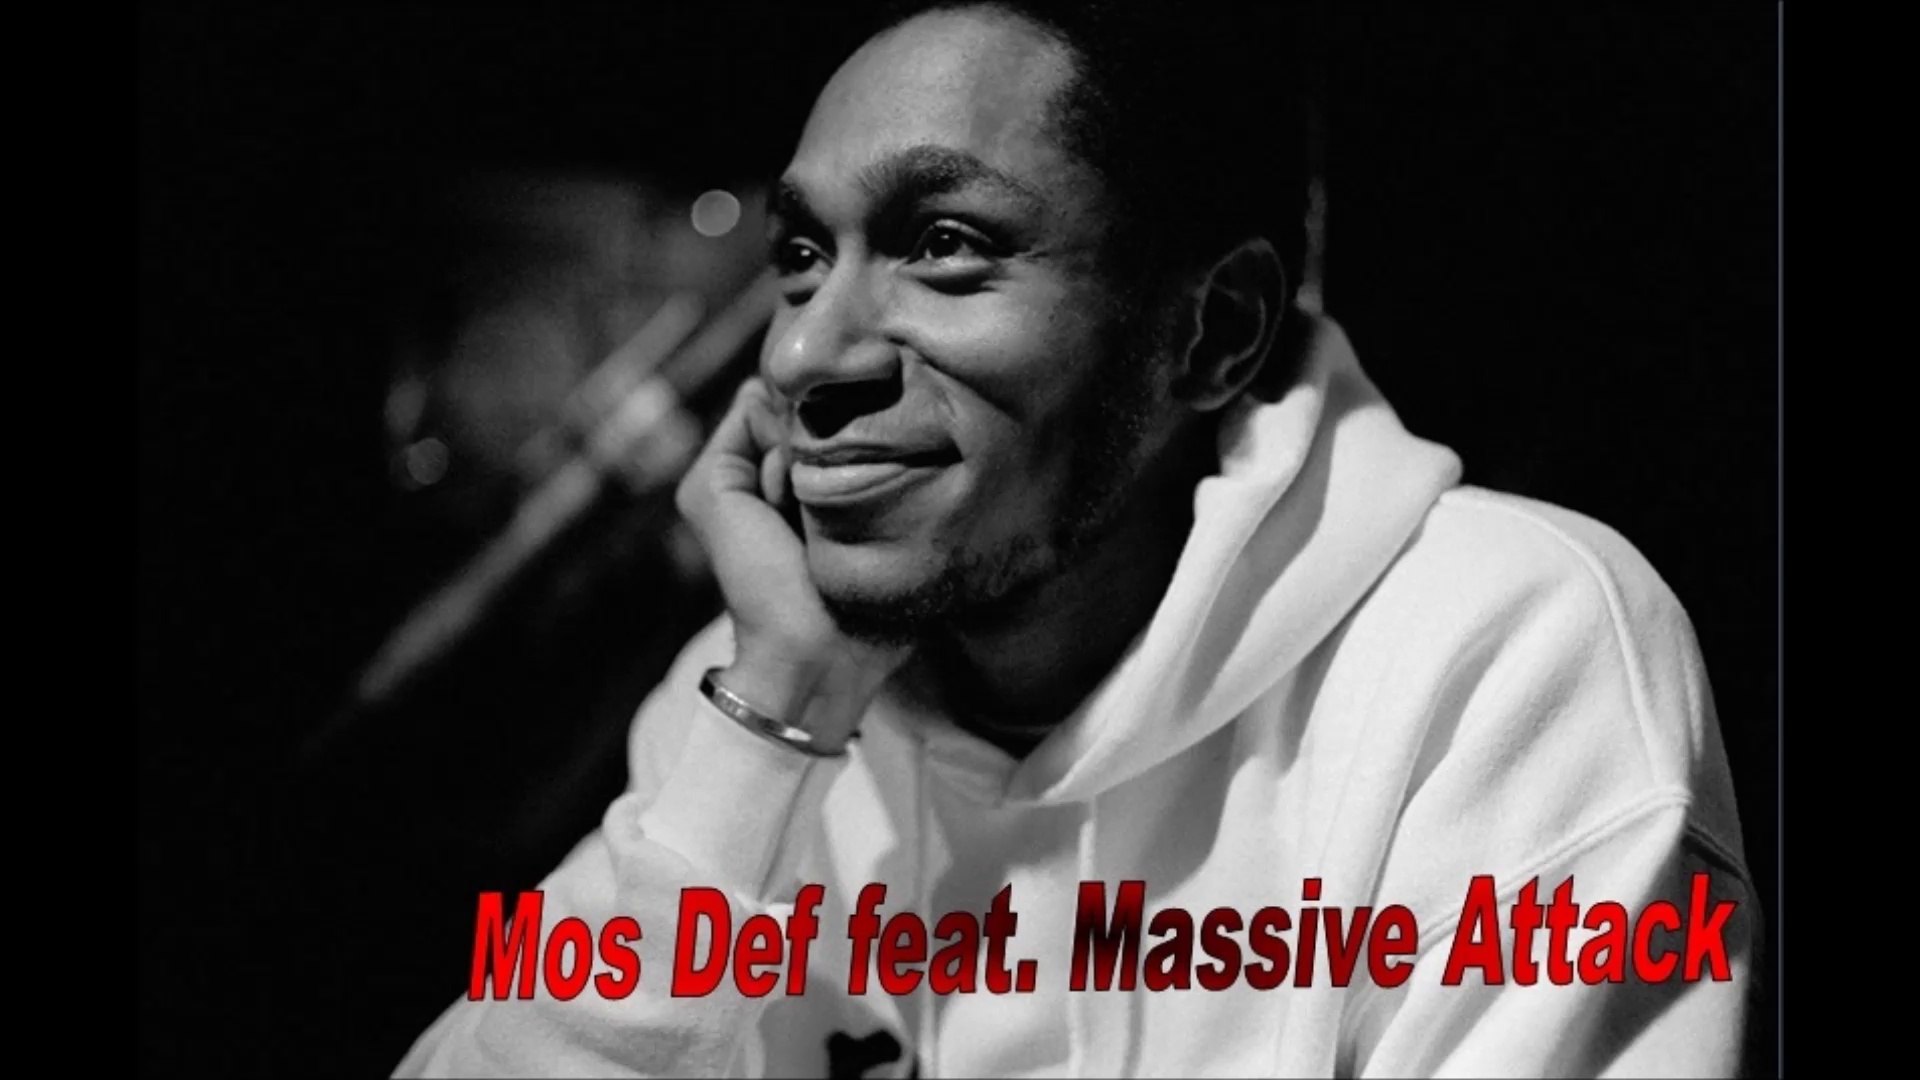 I Against I - Mos Def feat.Massive Attack [Official HQ Audio] -  ]\/[/,\'”|'” /-\L'”|'”aF - video Dailymotion